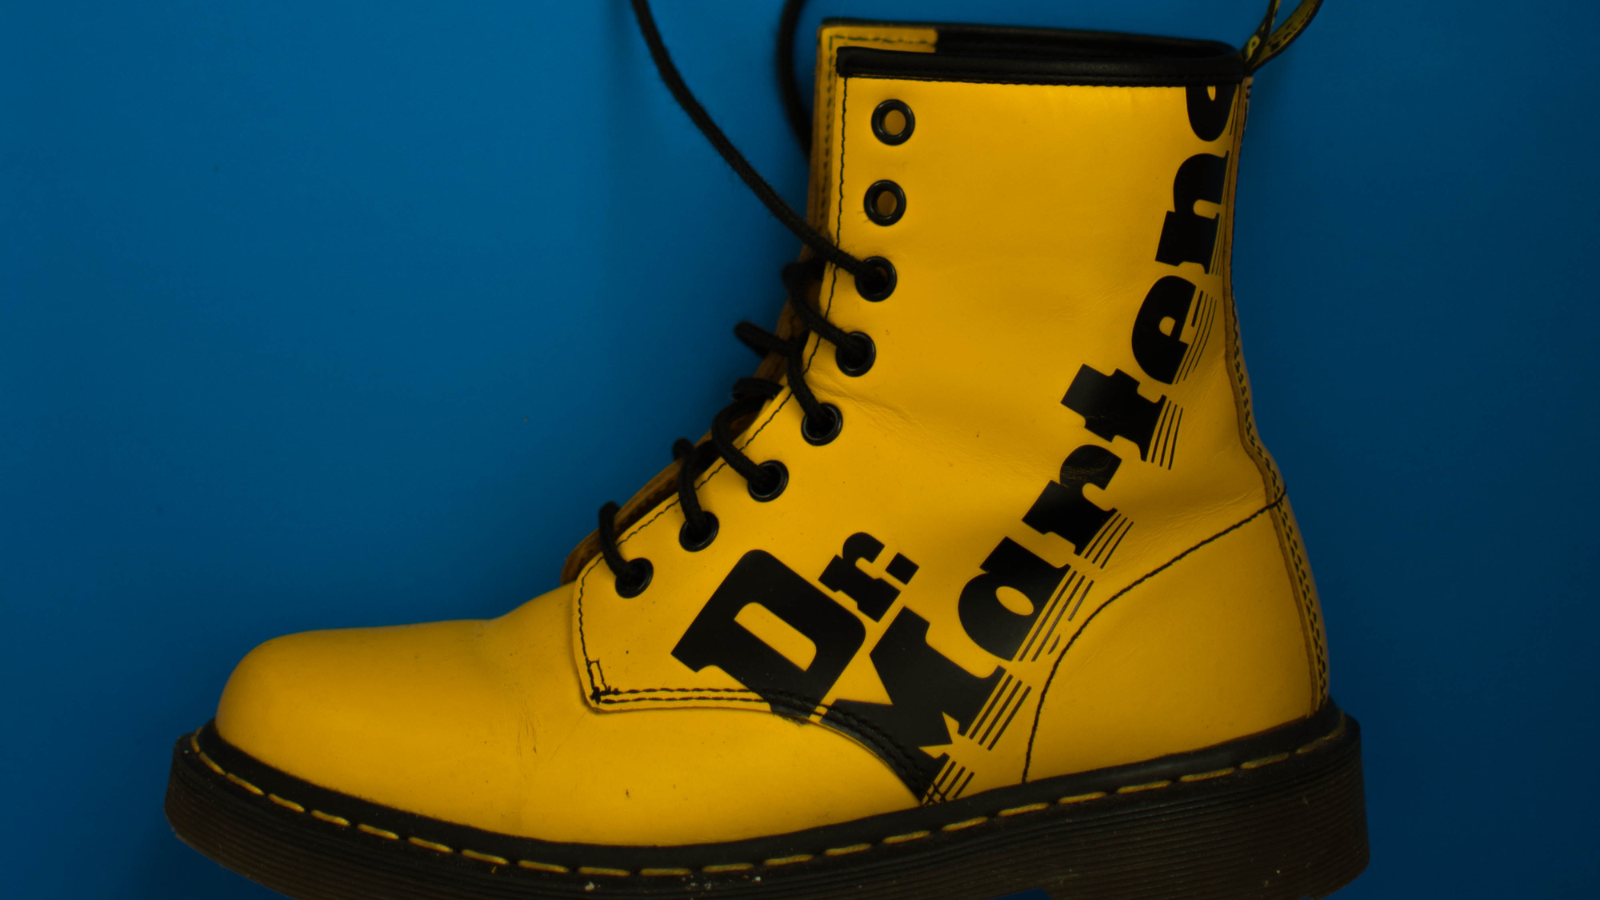 Dr. Martens “Joins the Revolution” with Microsoft Dynamics 365